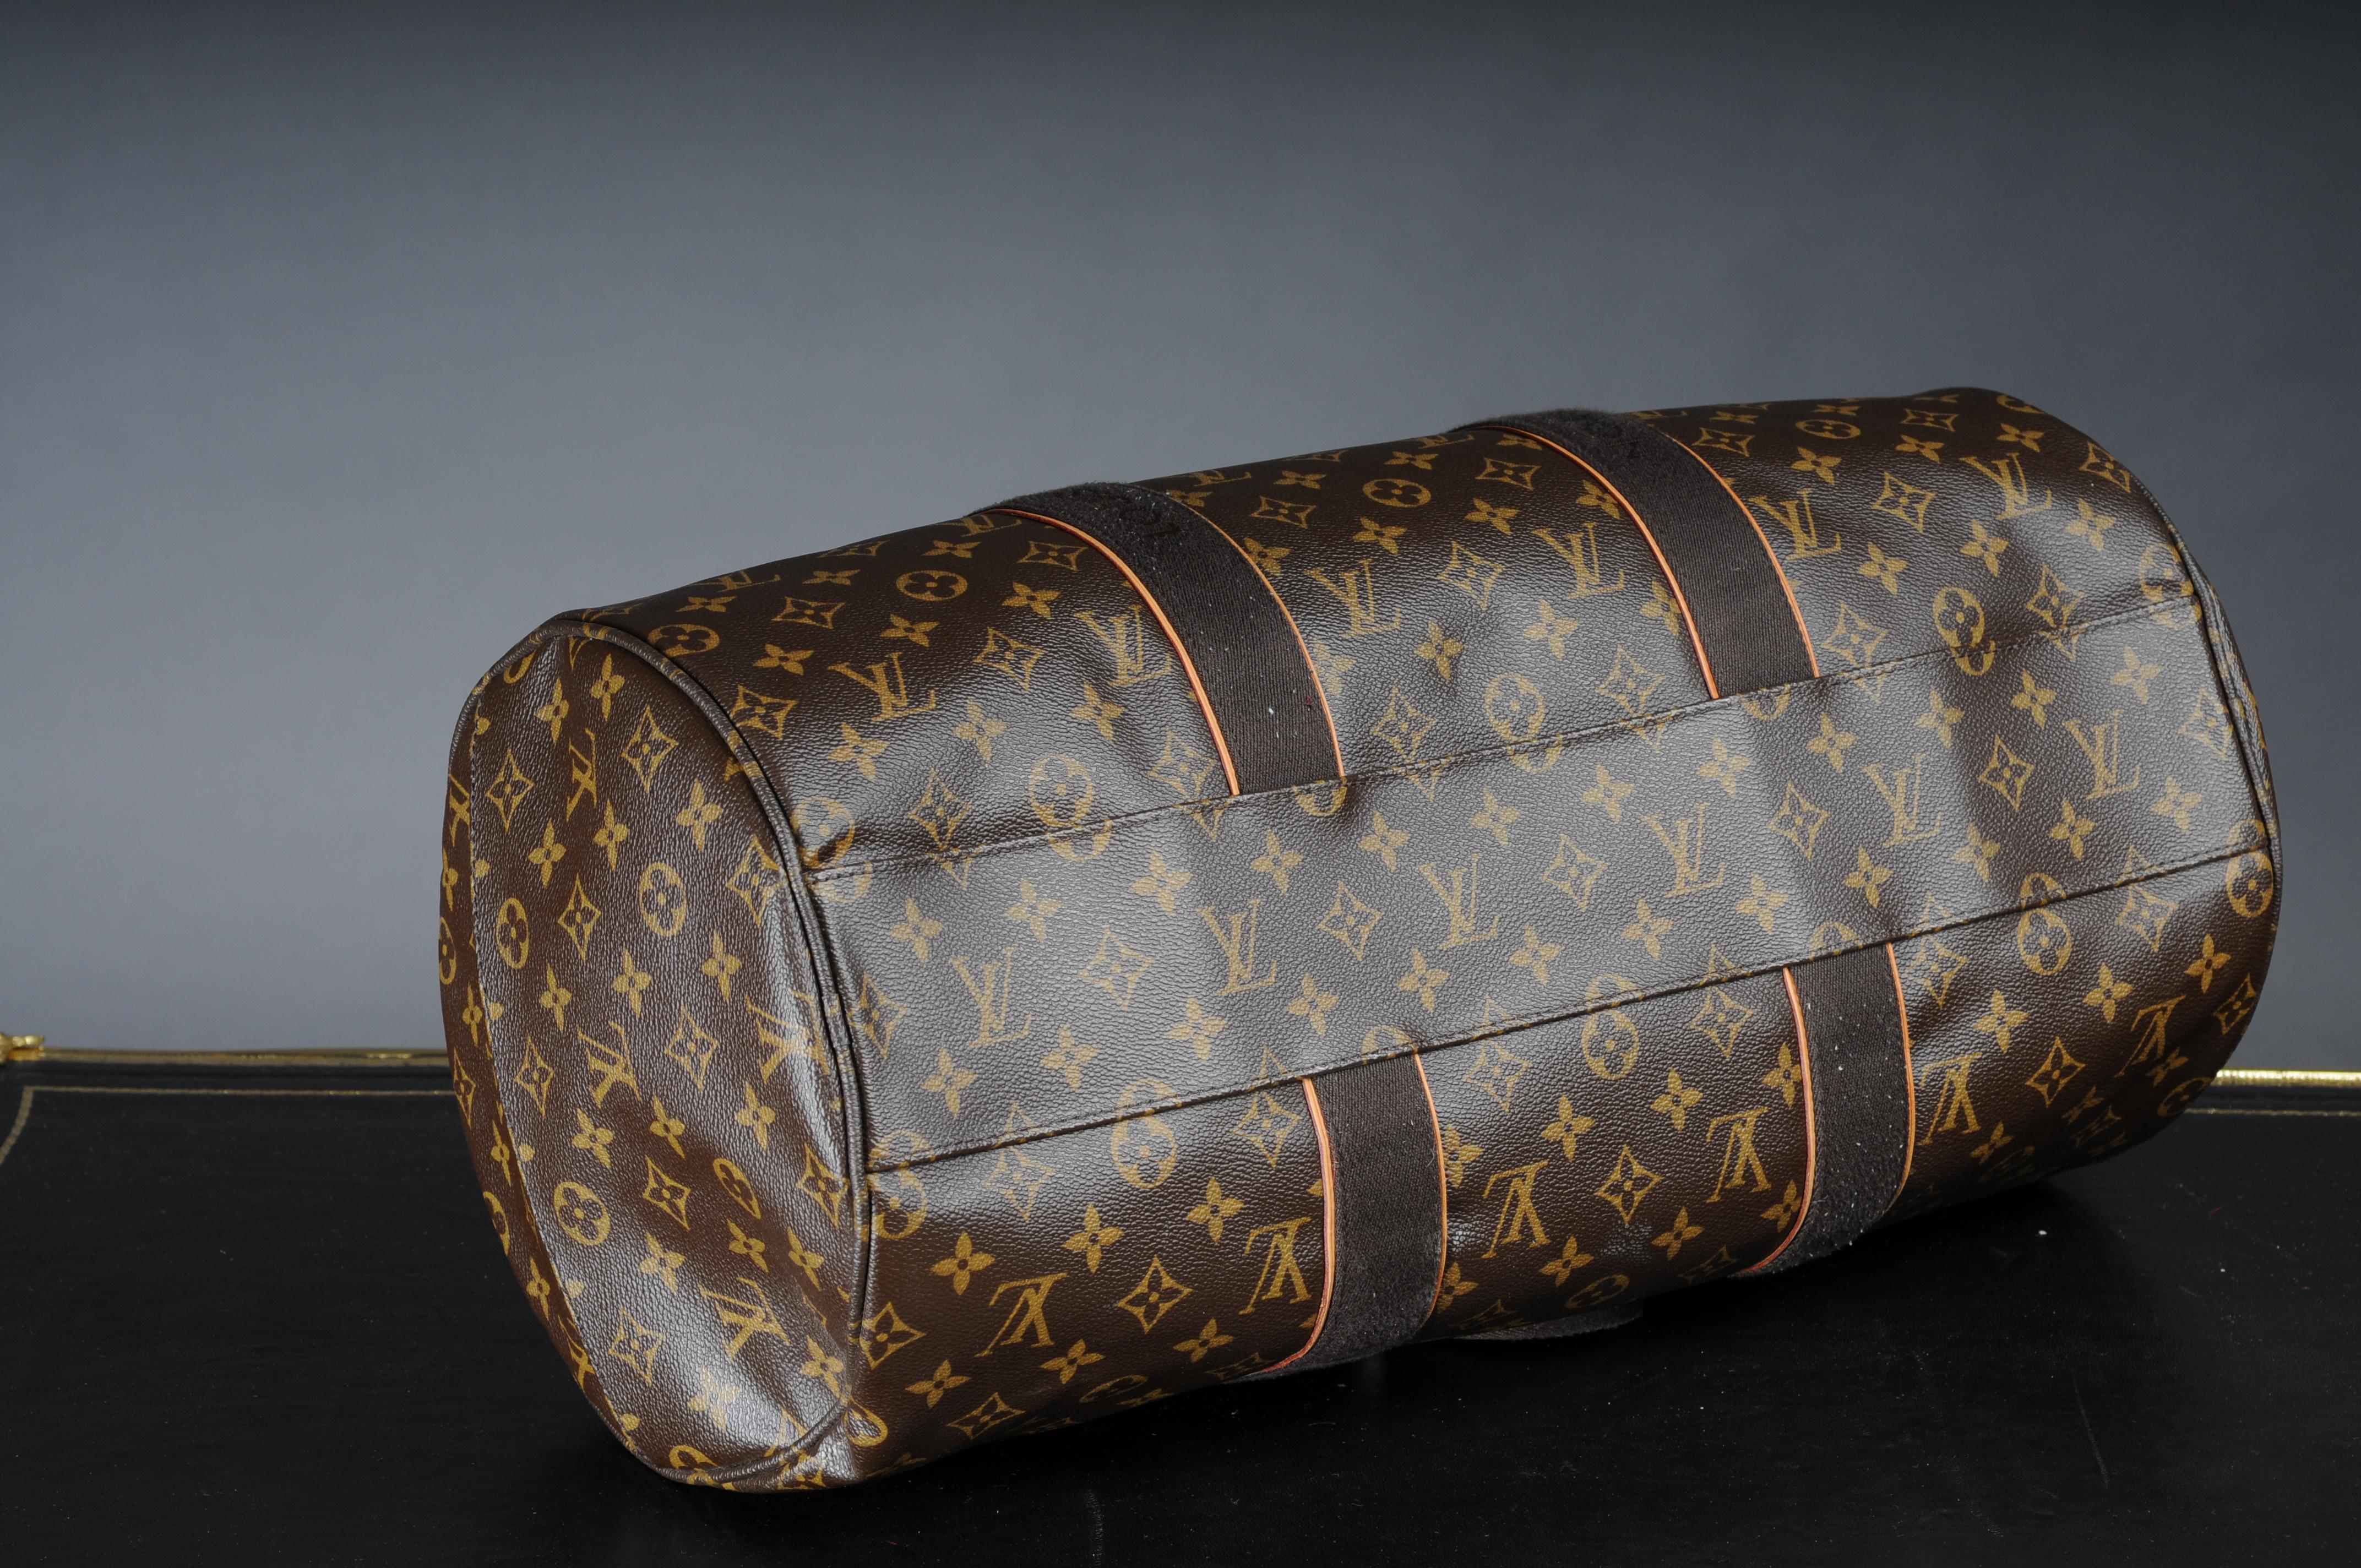 Louis Vuitton Pre-Owned 2009 Sporty Beaubourg sports bag For Sale 13